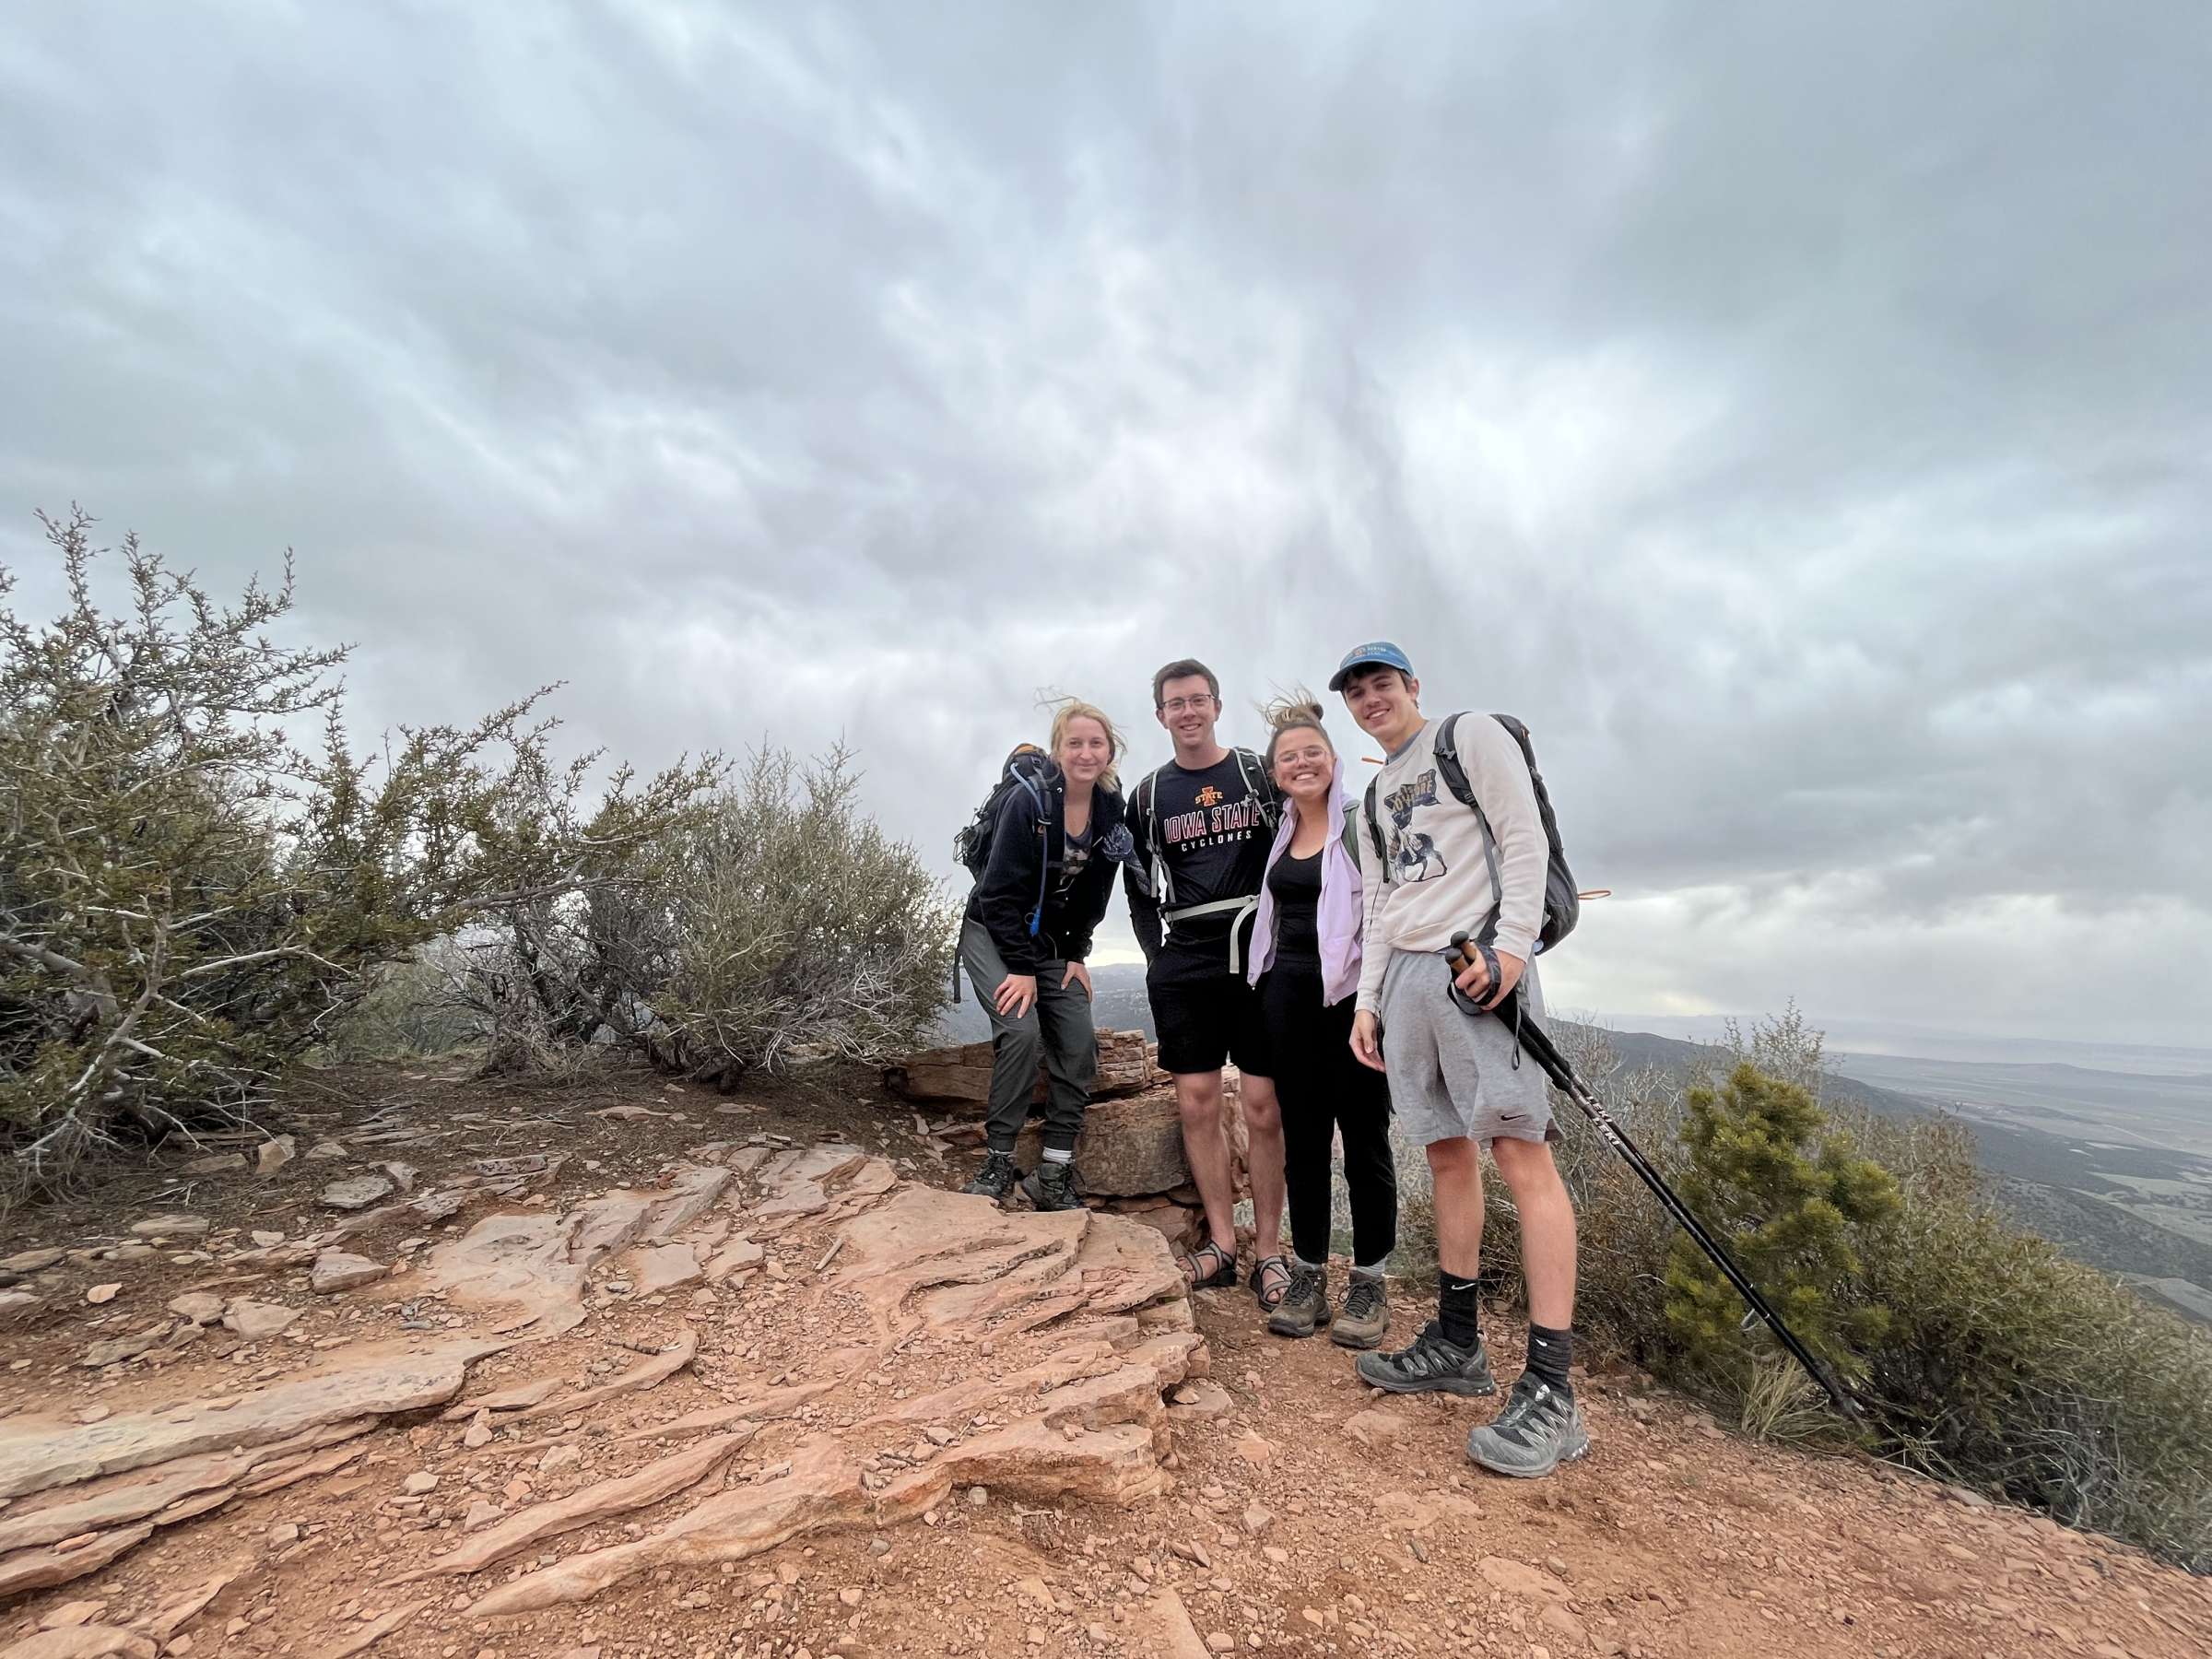 Image shows a group posing on a hike against a cloudy background